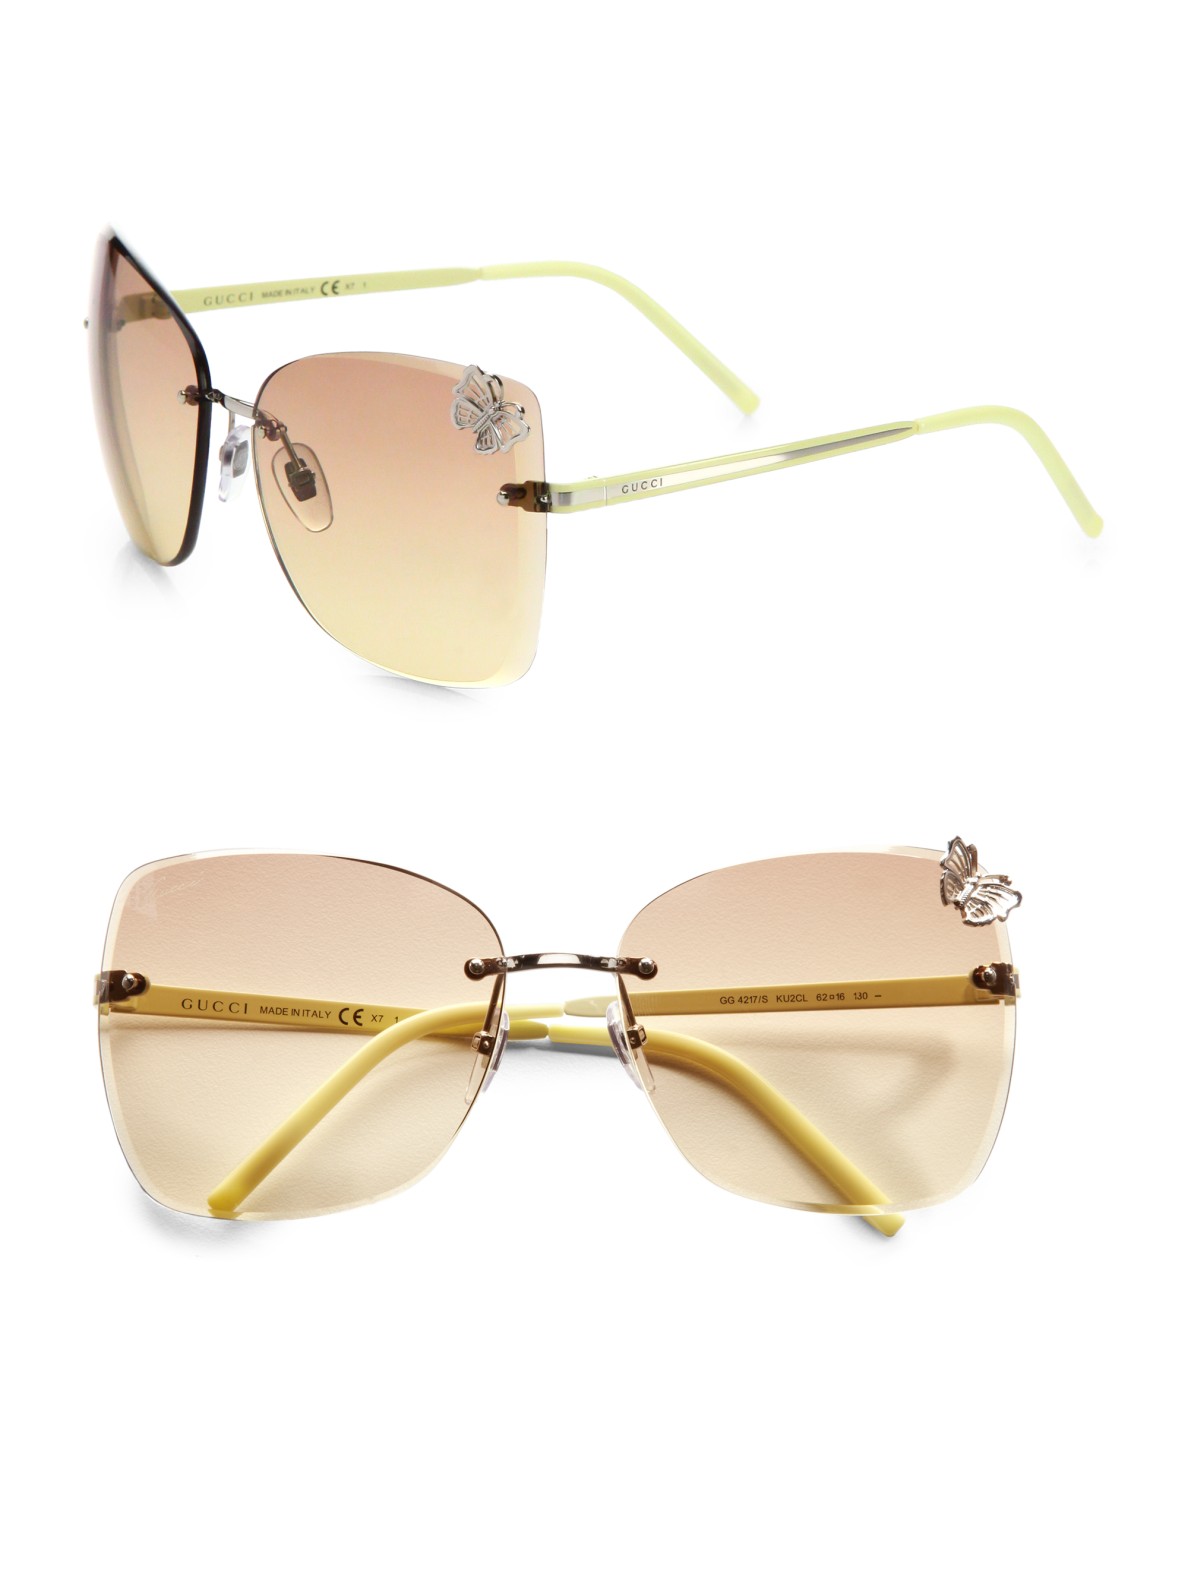 Gucci Rimless Butterfly Sunglasses in Yellow (Metallic) - Lyst